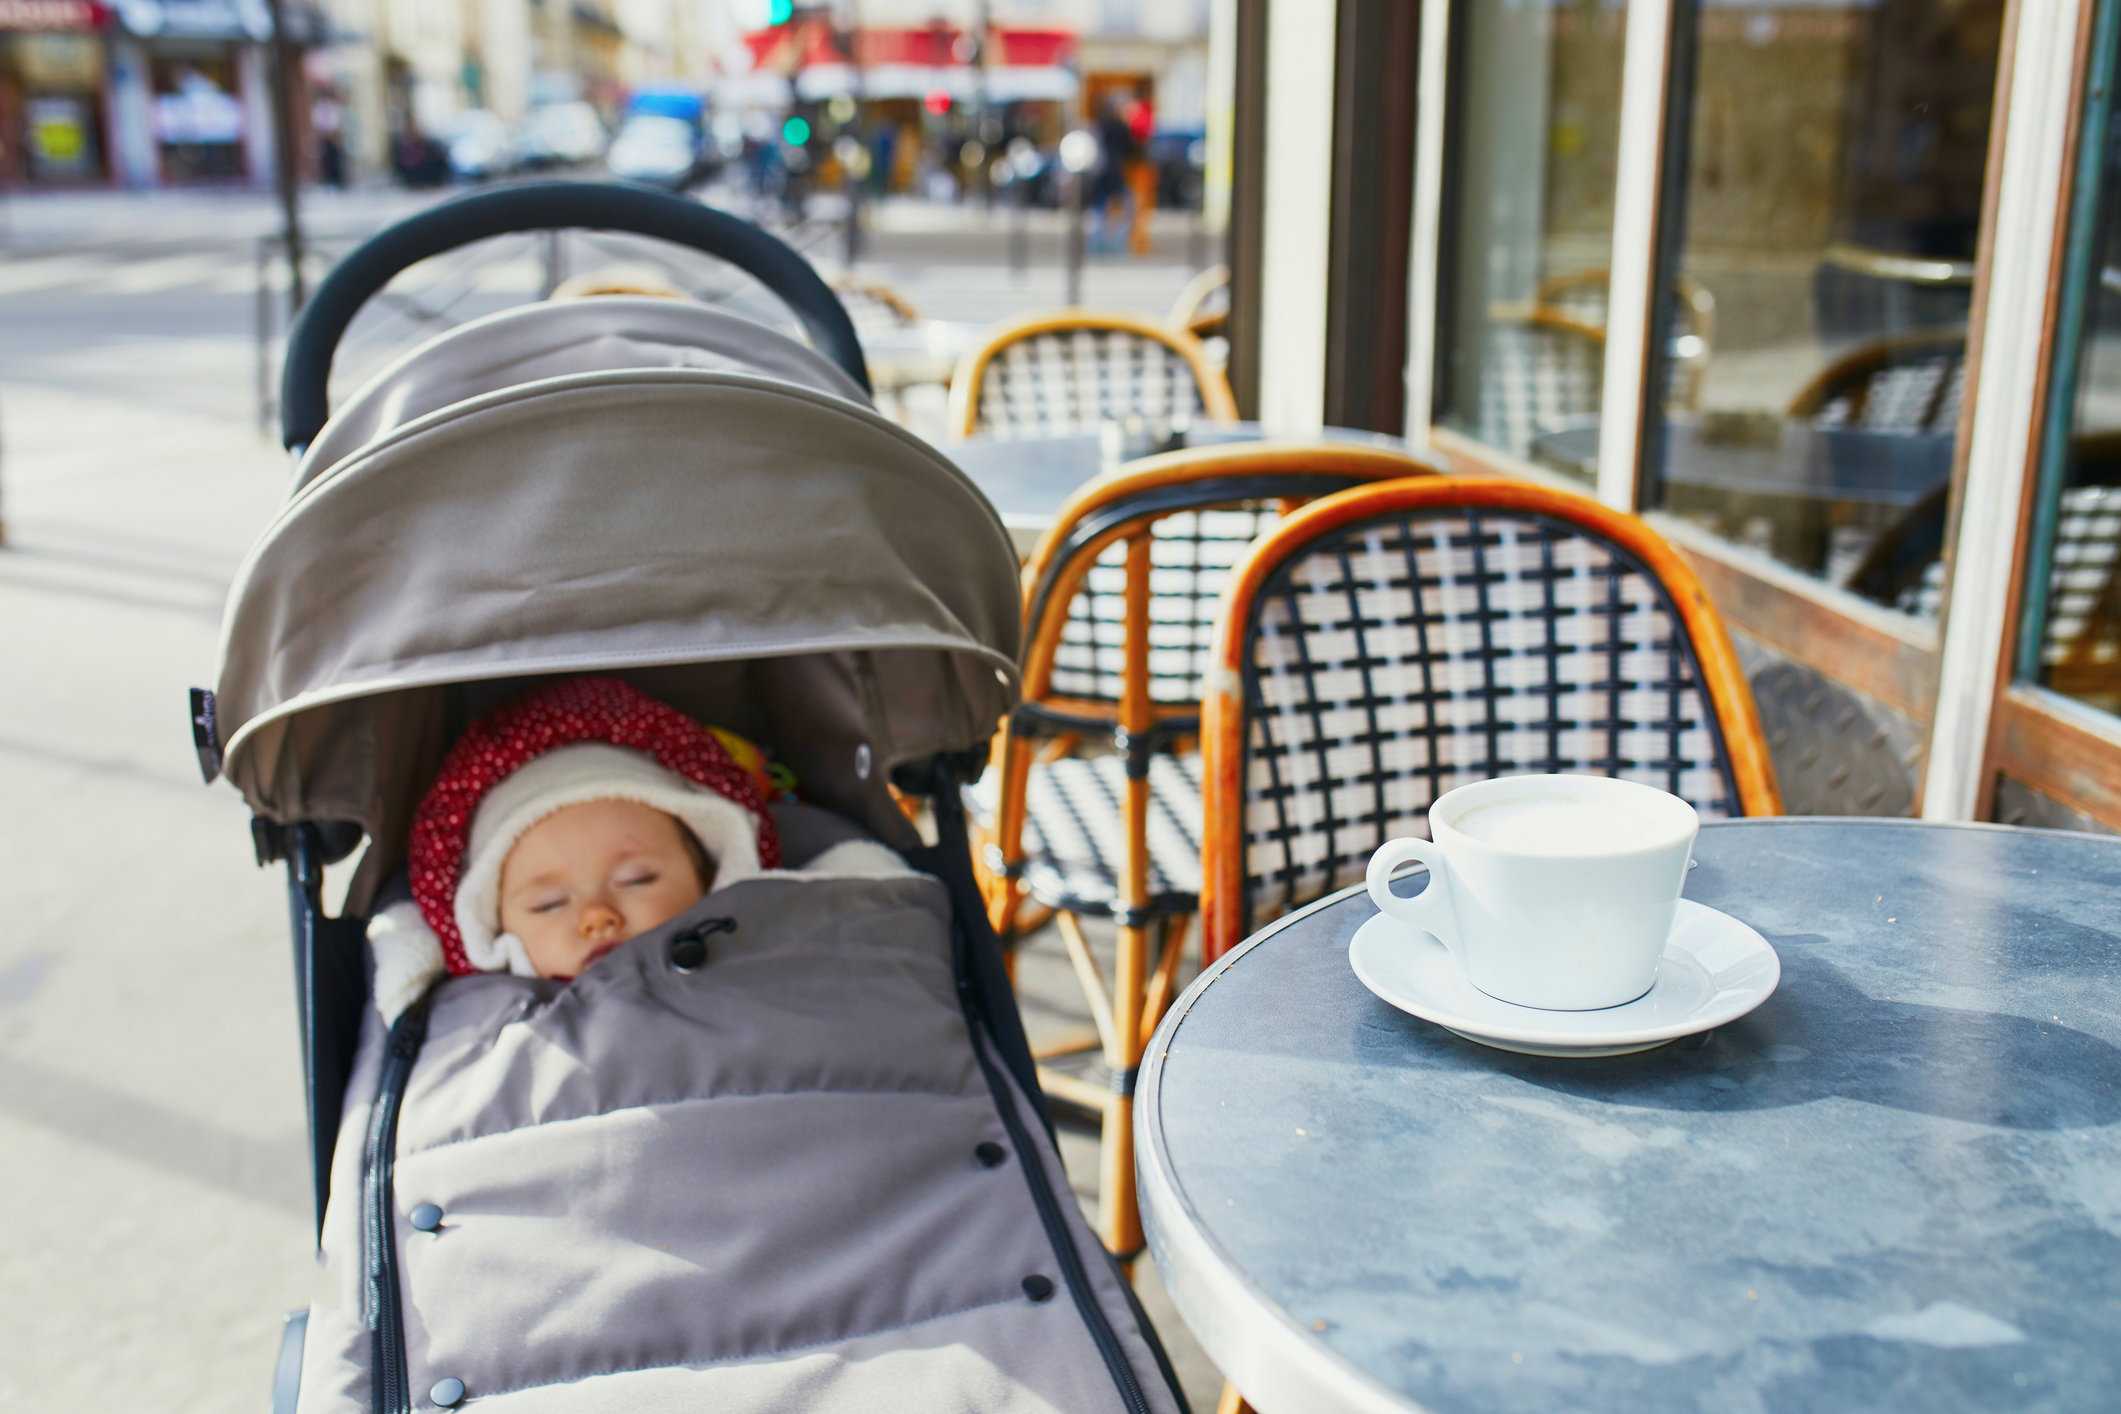 Baby in a stroller next to a coffee cup on a café table on a city street